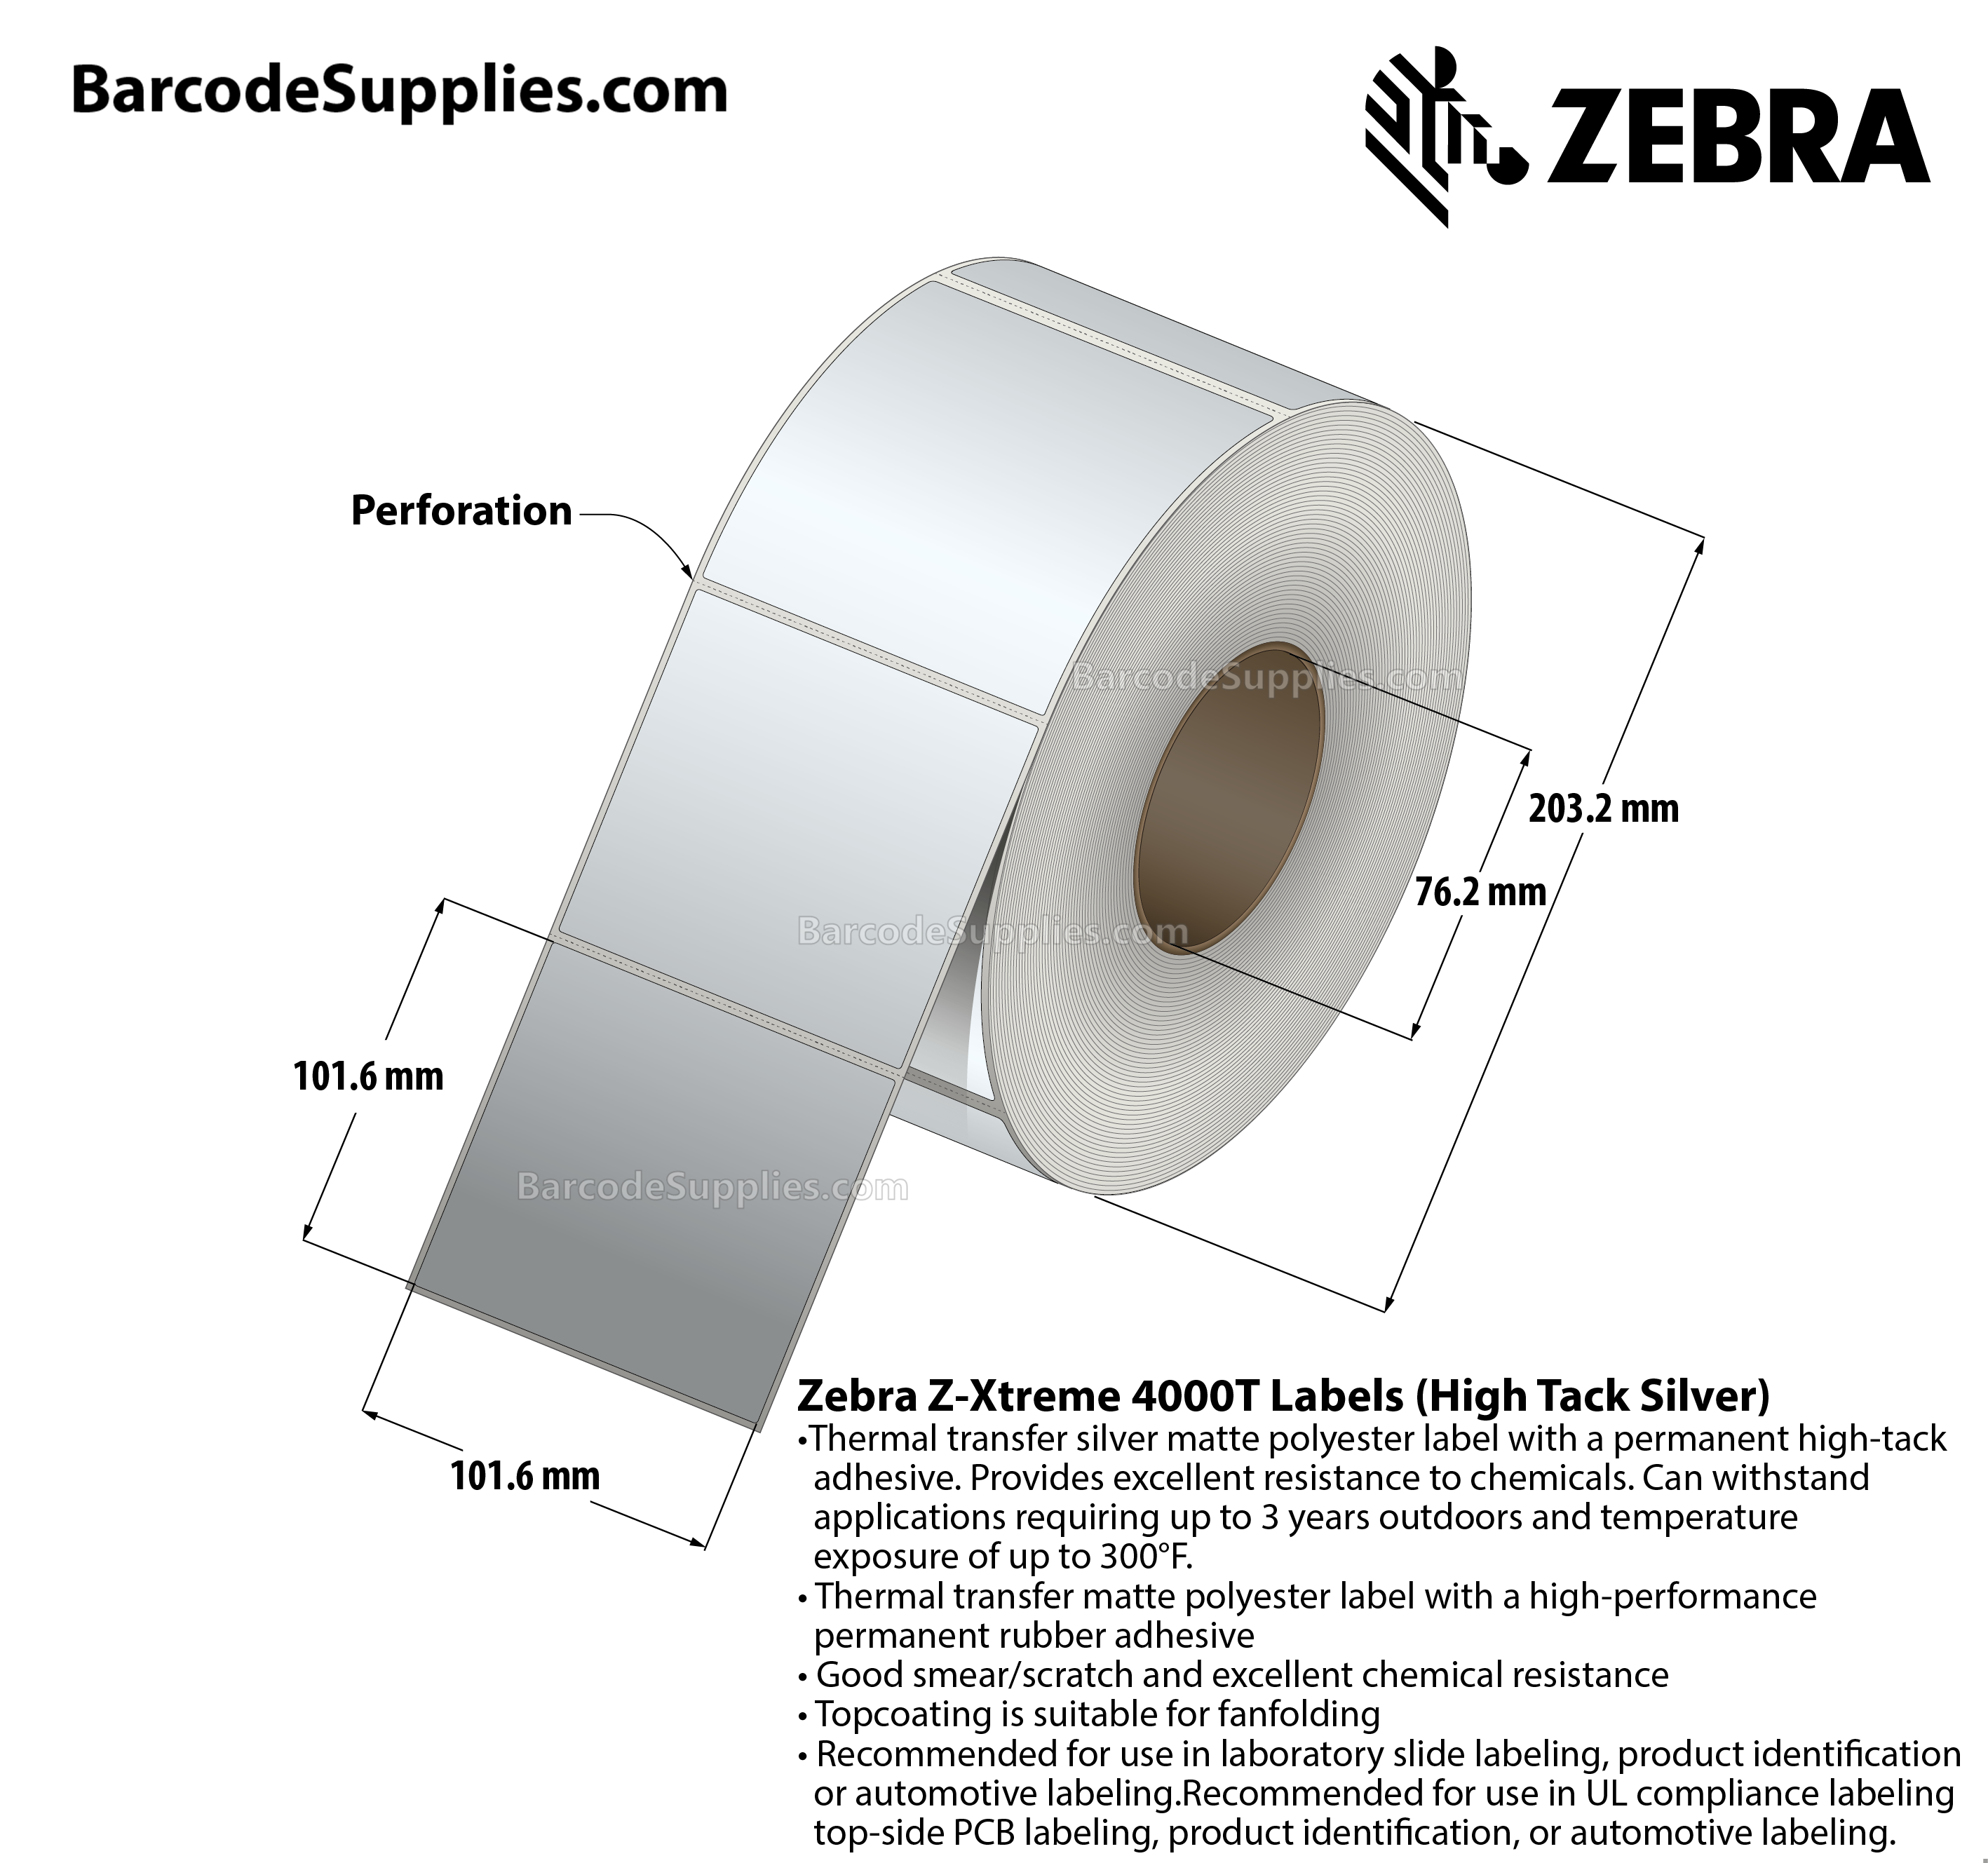 4 x 4 Thermal Transfer Silver Z-Xtreme 4000T High-Tack Silver Labels With High-tack Adhesive - Perforated - 1000 Labels Per Roll - Carton Of 1 Rolls - 1000 Labels Total - MPN: 10023183